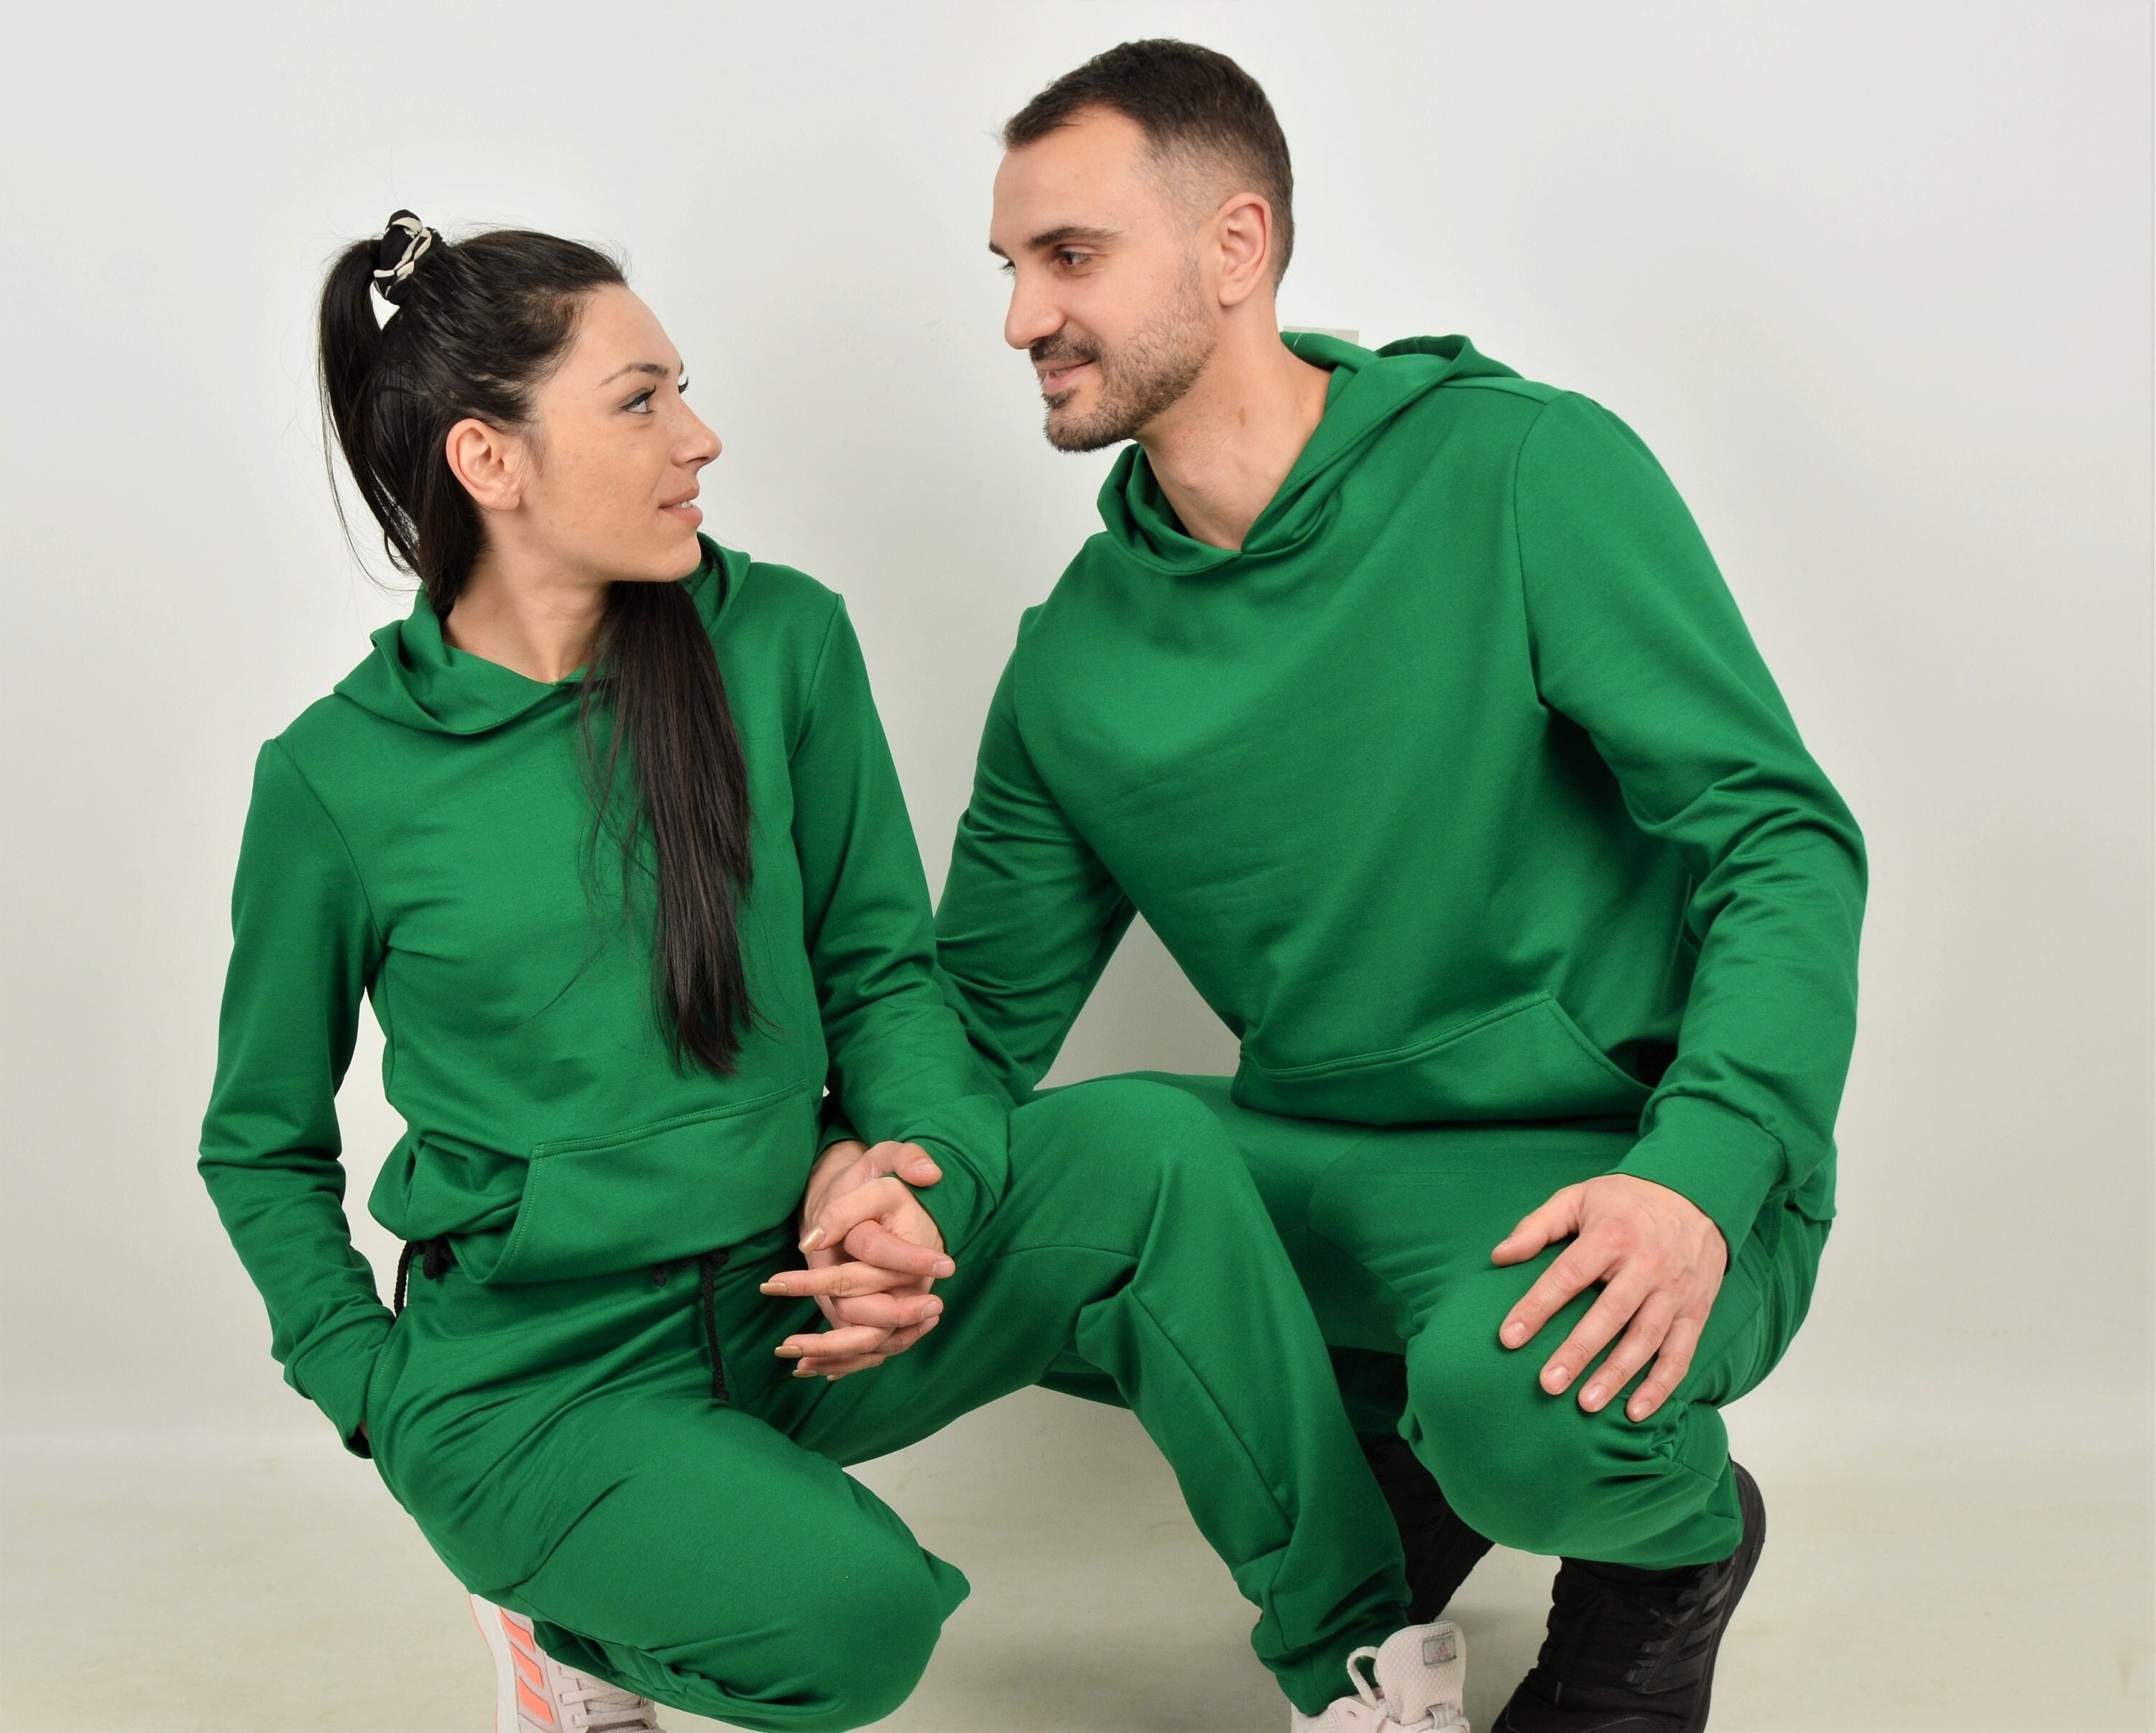 Matching Couple Green Sweatsuits, His and Hers Outfit, Matching